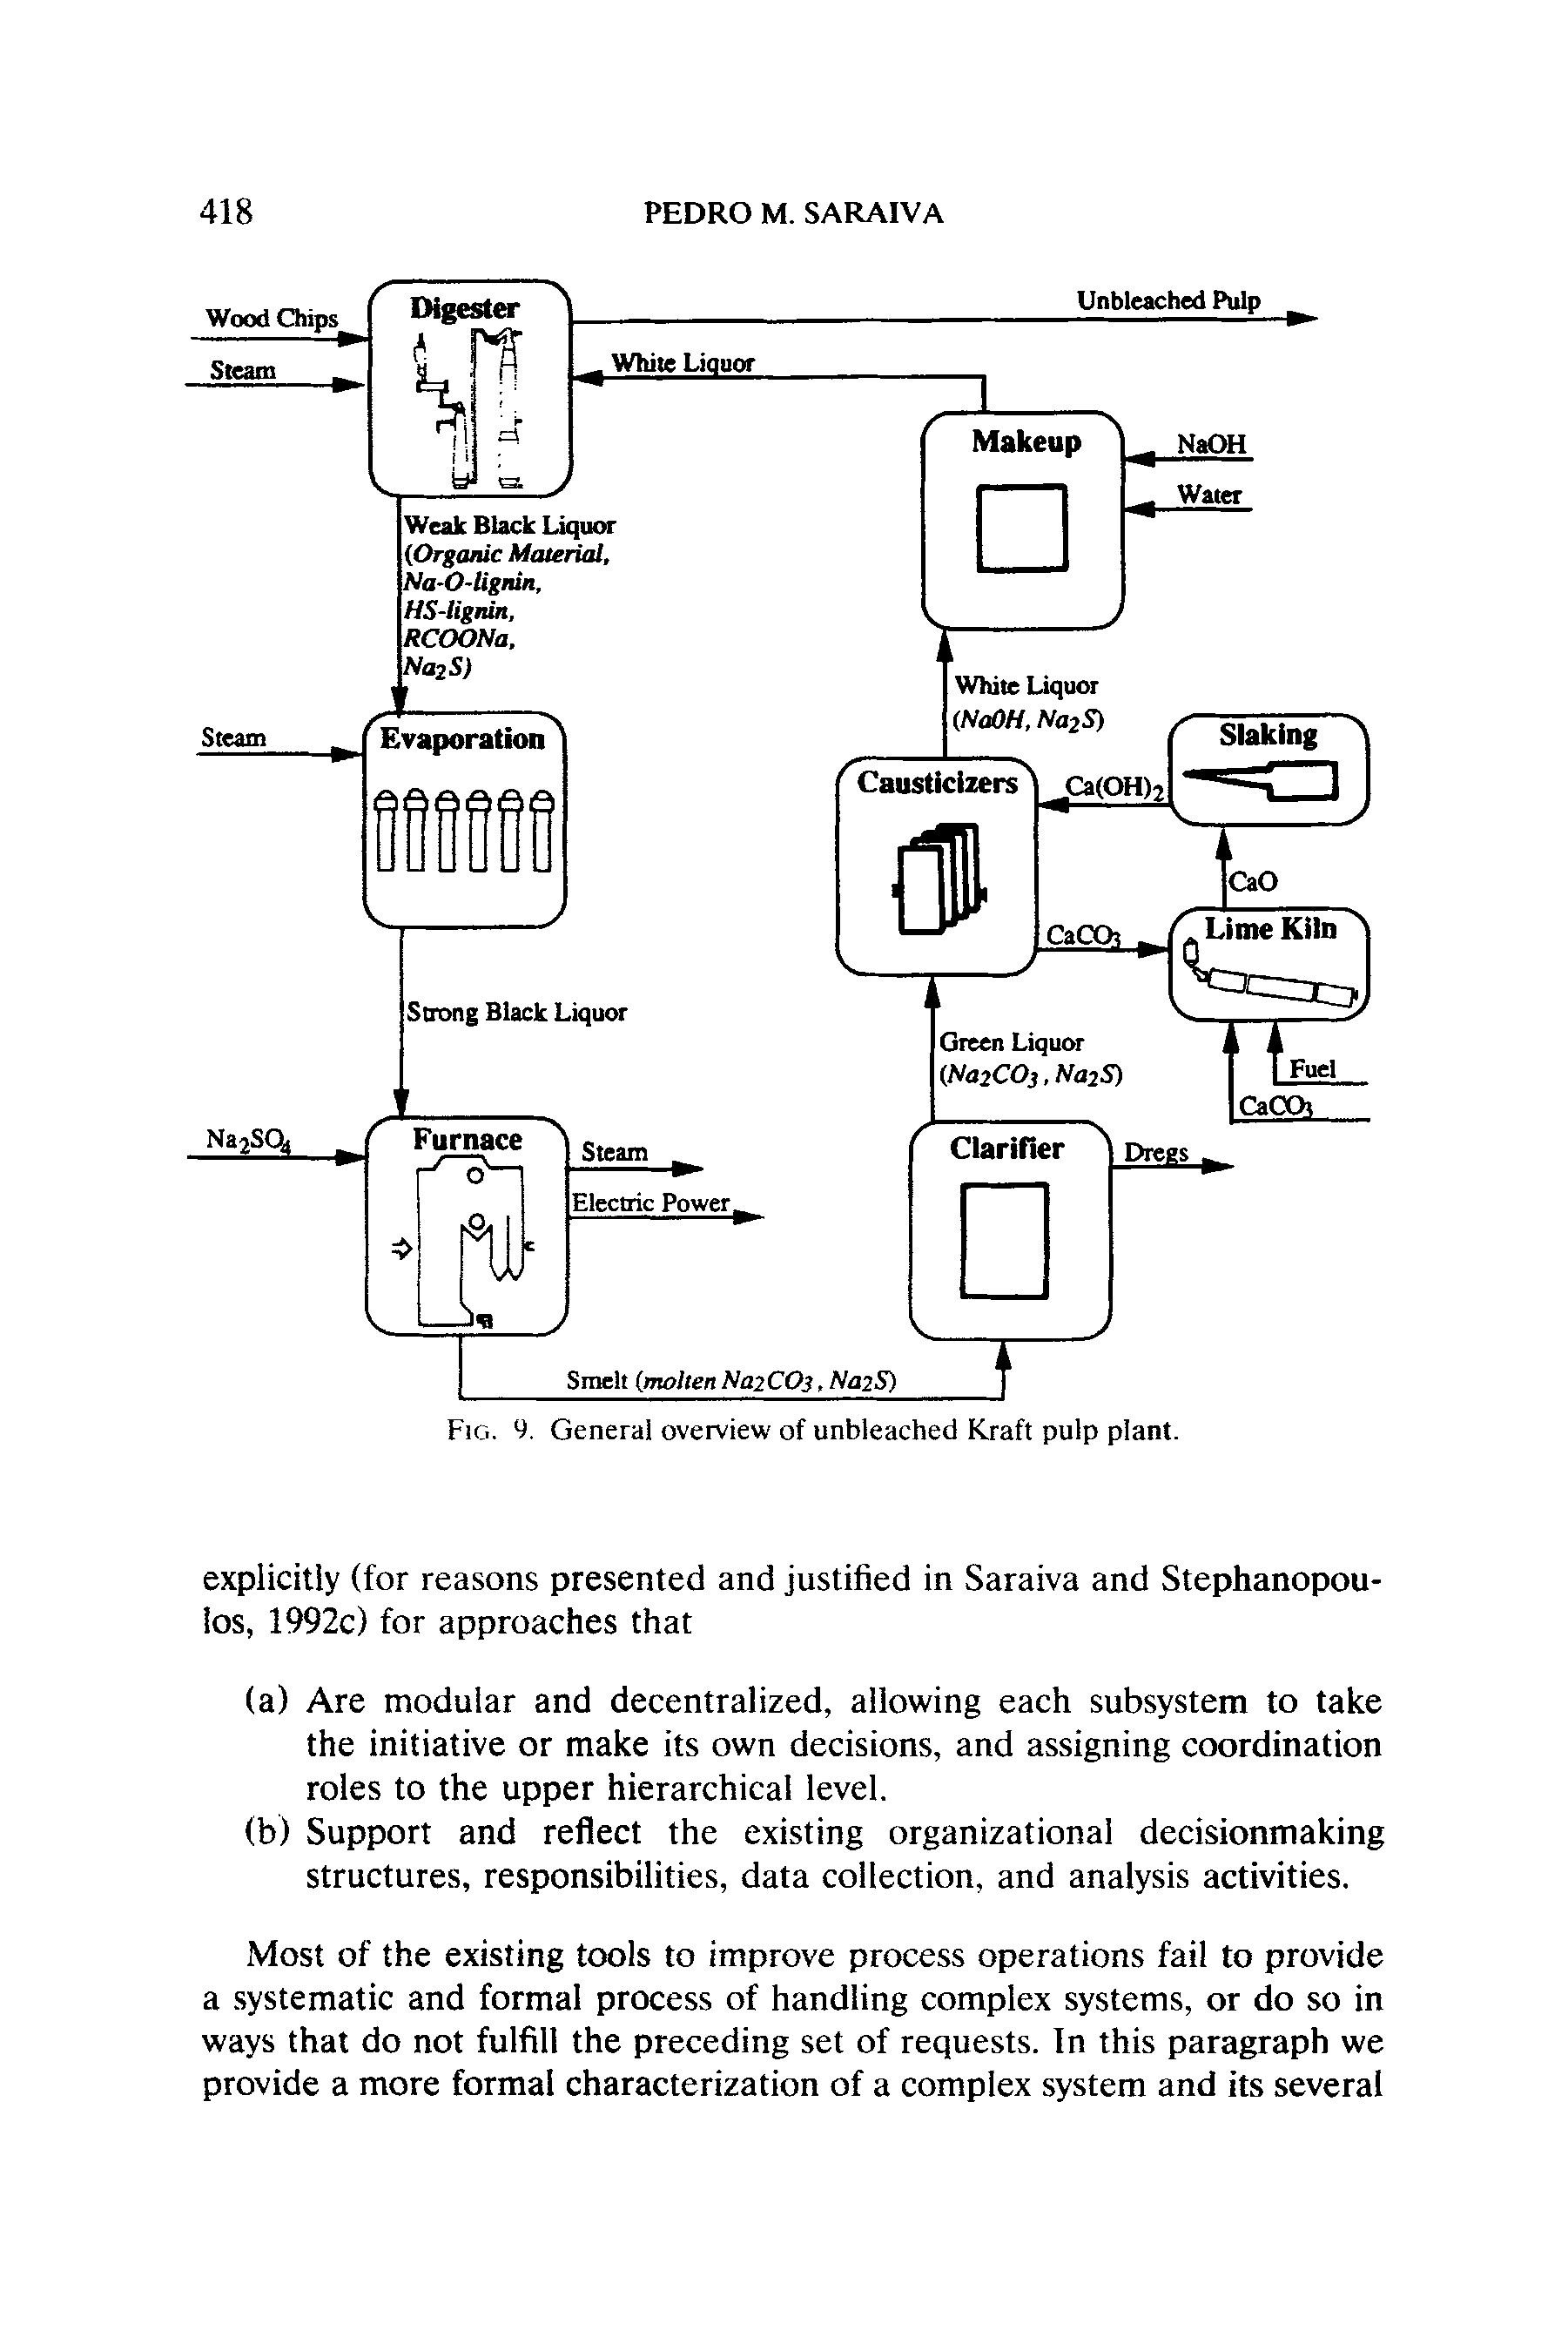 Fig. 9. General overview of unbleached Kraft pulp plant.